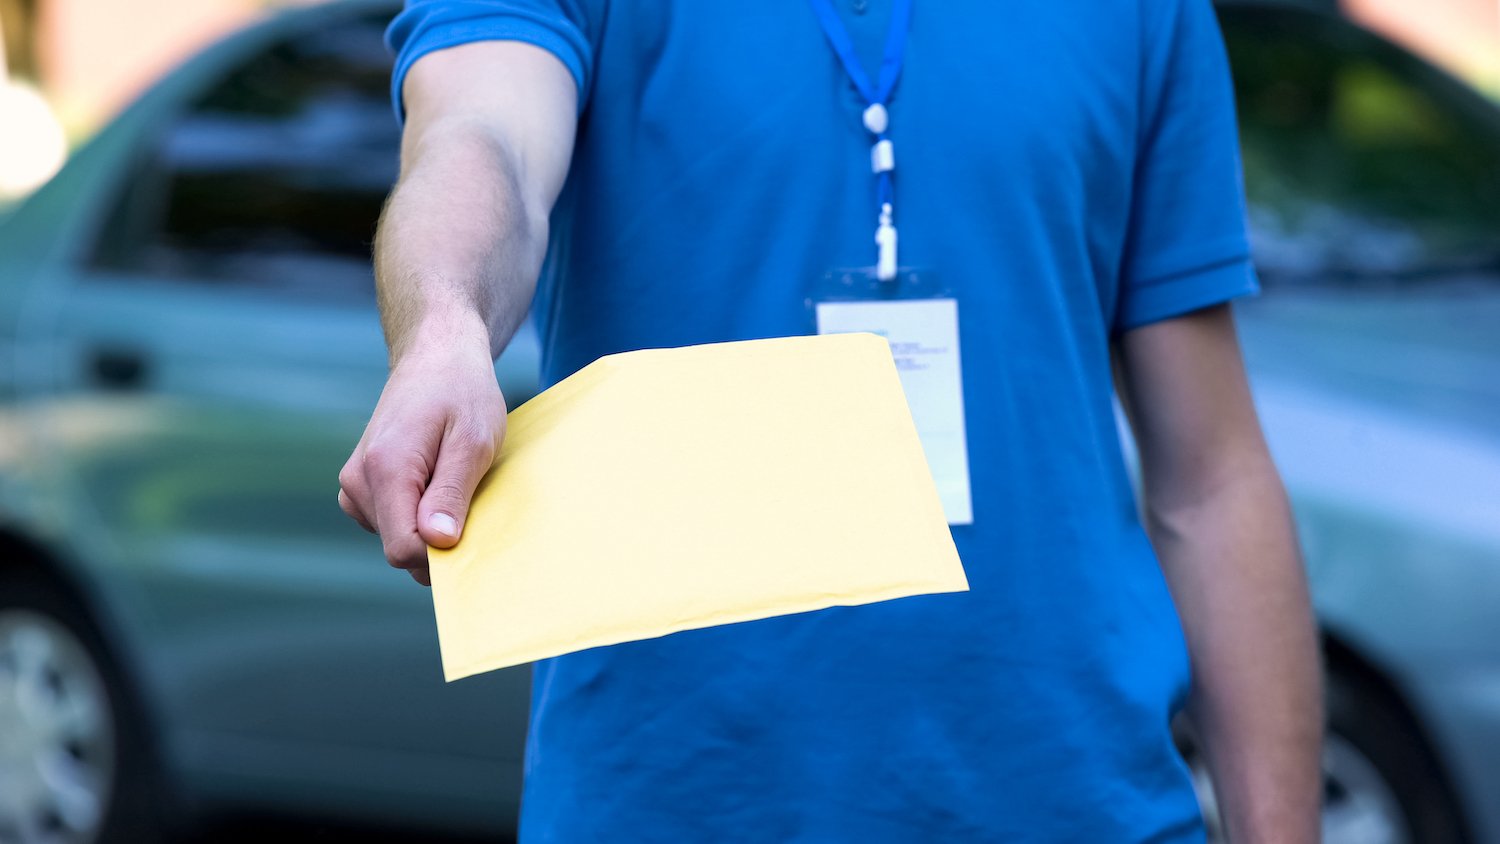 Stock photo of a document being delivered.